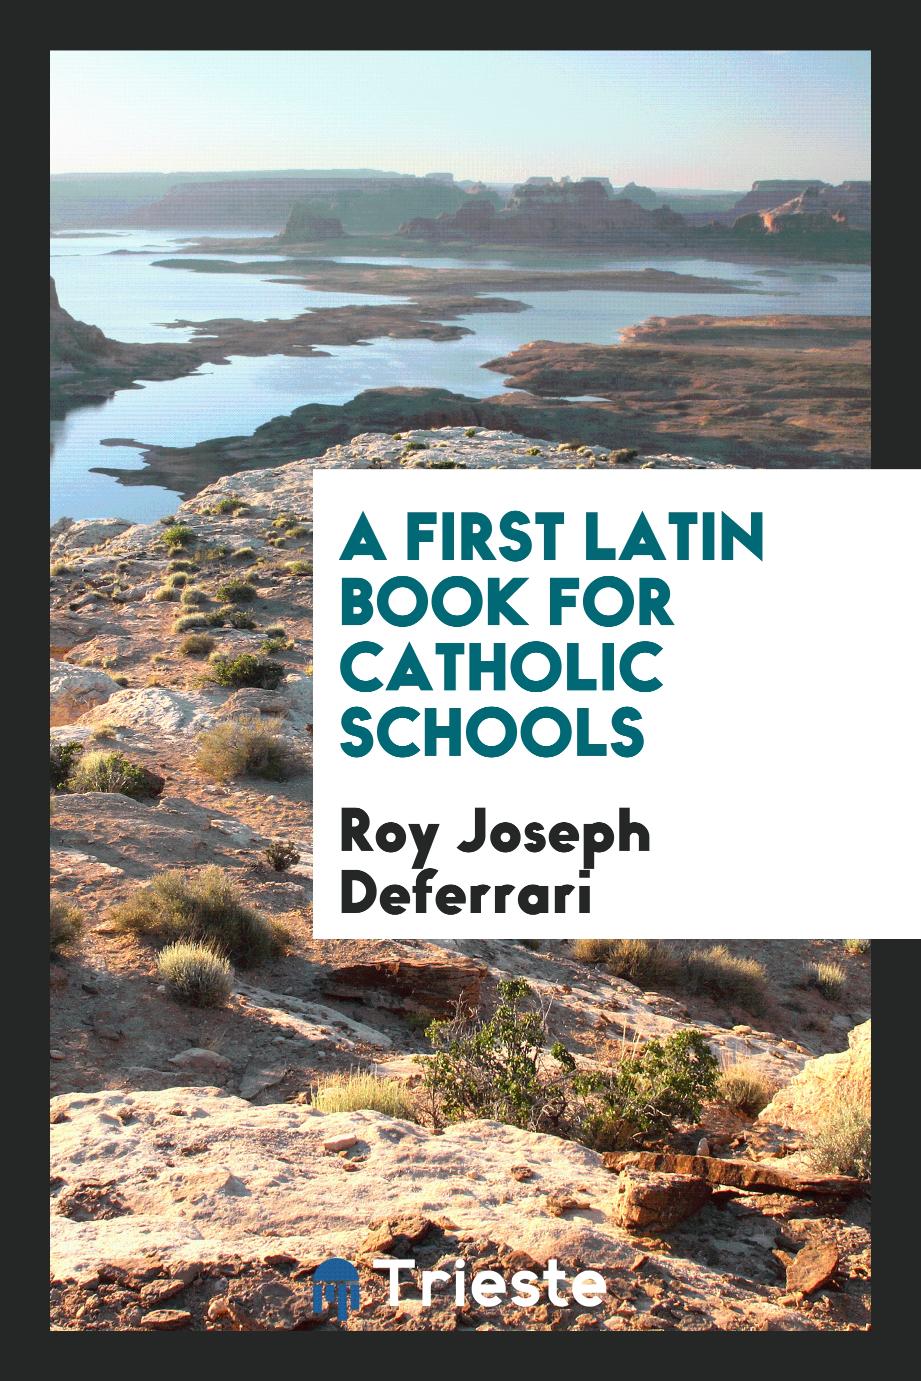 A First Latin Book for Catholic Schools